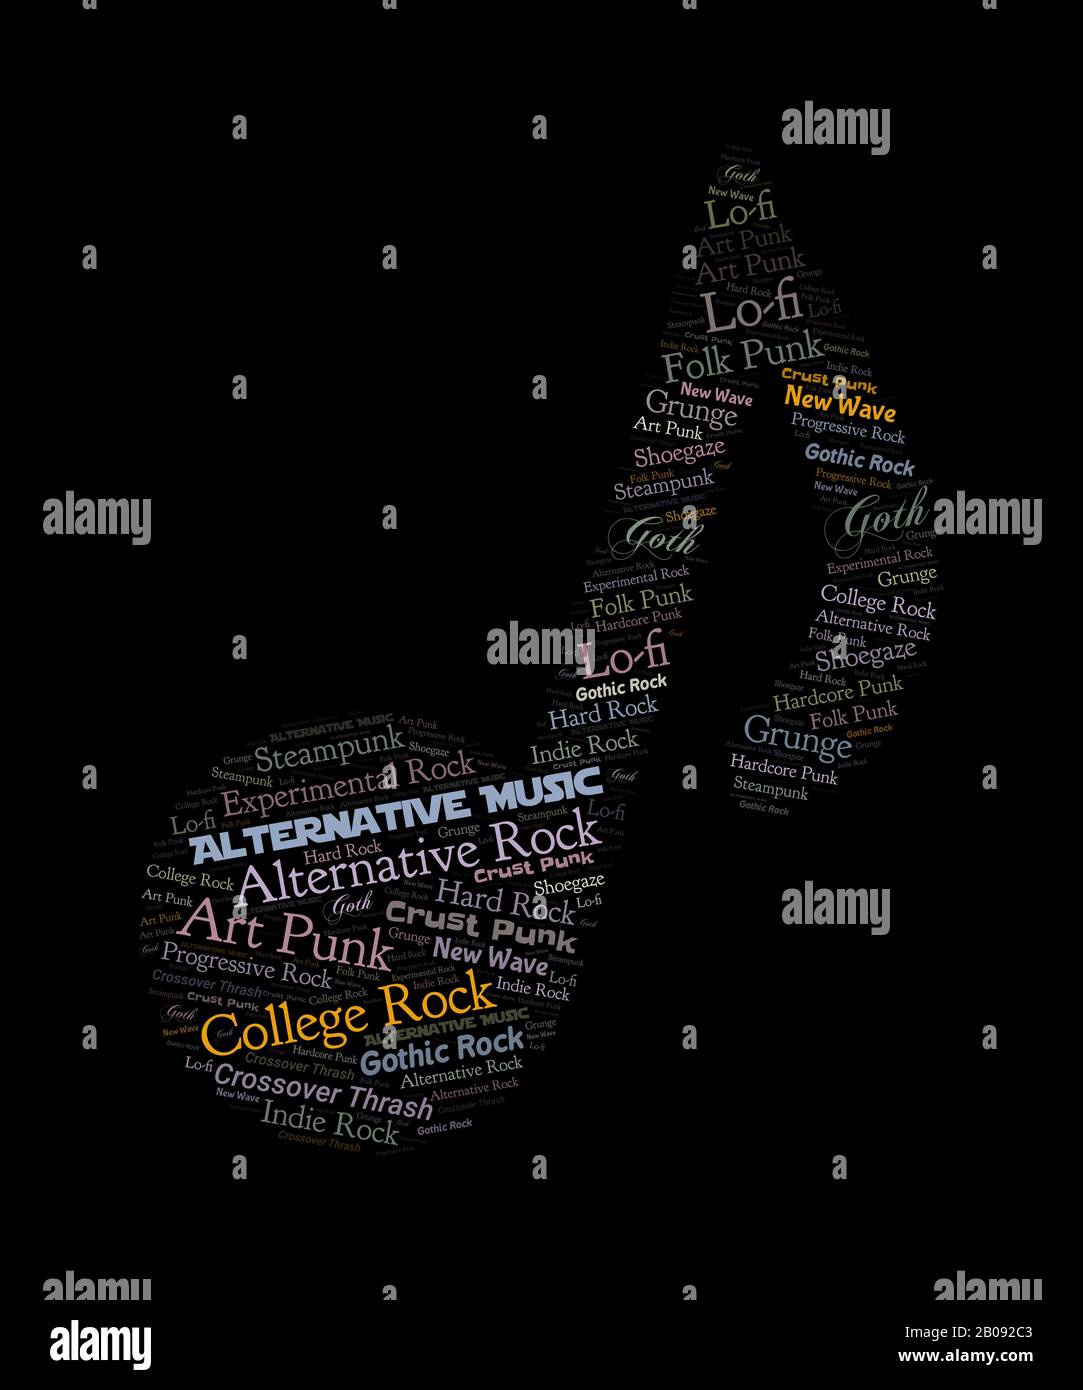 Alternative music word cloud graphic in a musical note shape.  Subgenres are: college rock, new wave, lo-fi, hardcore punk, shoegaze, crust punk. Stock Photo